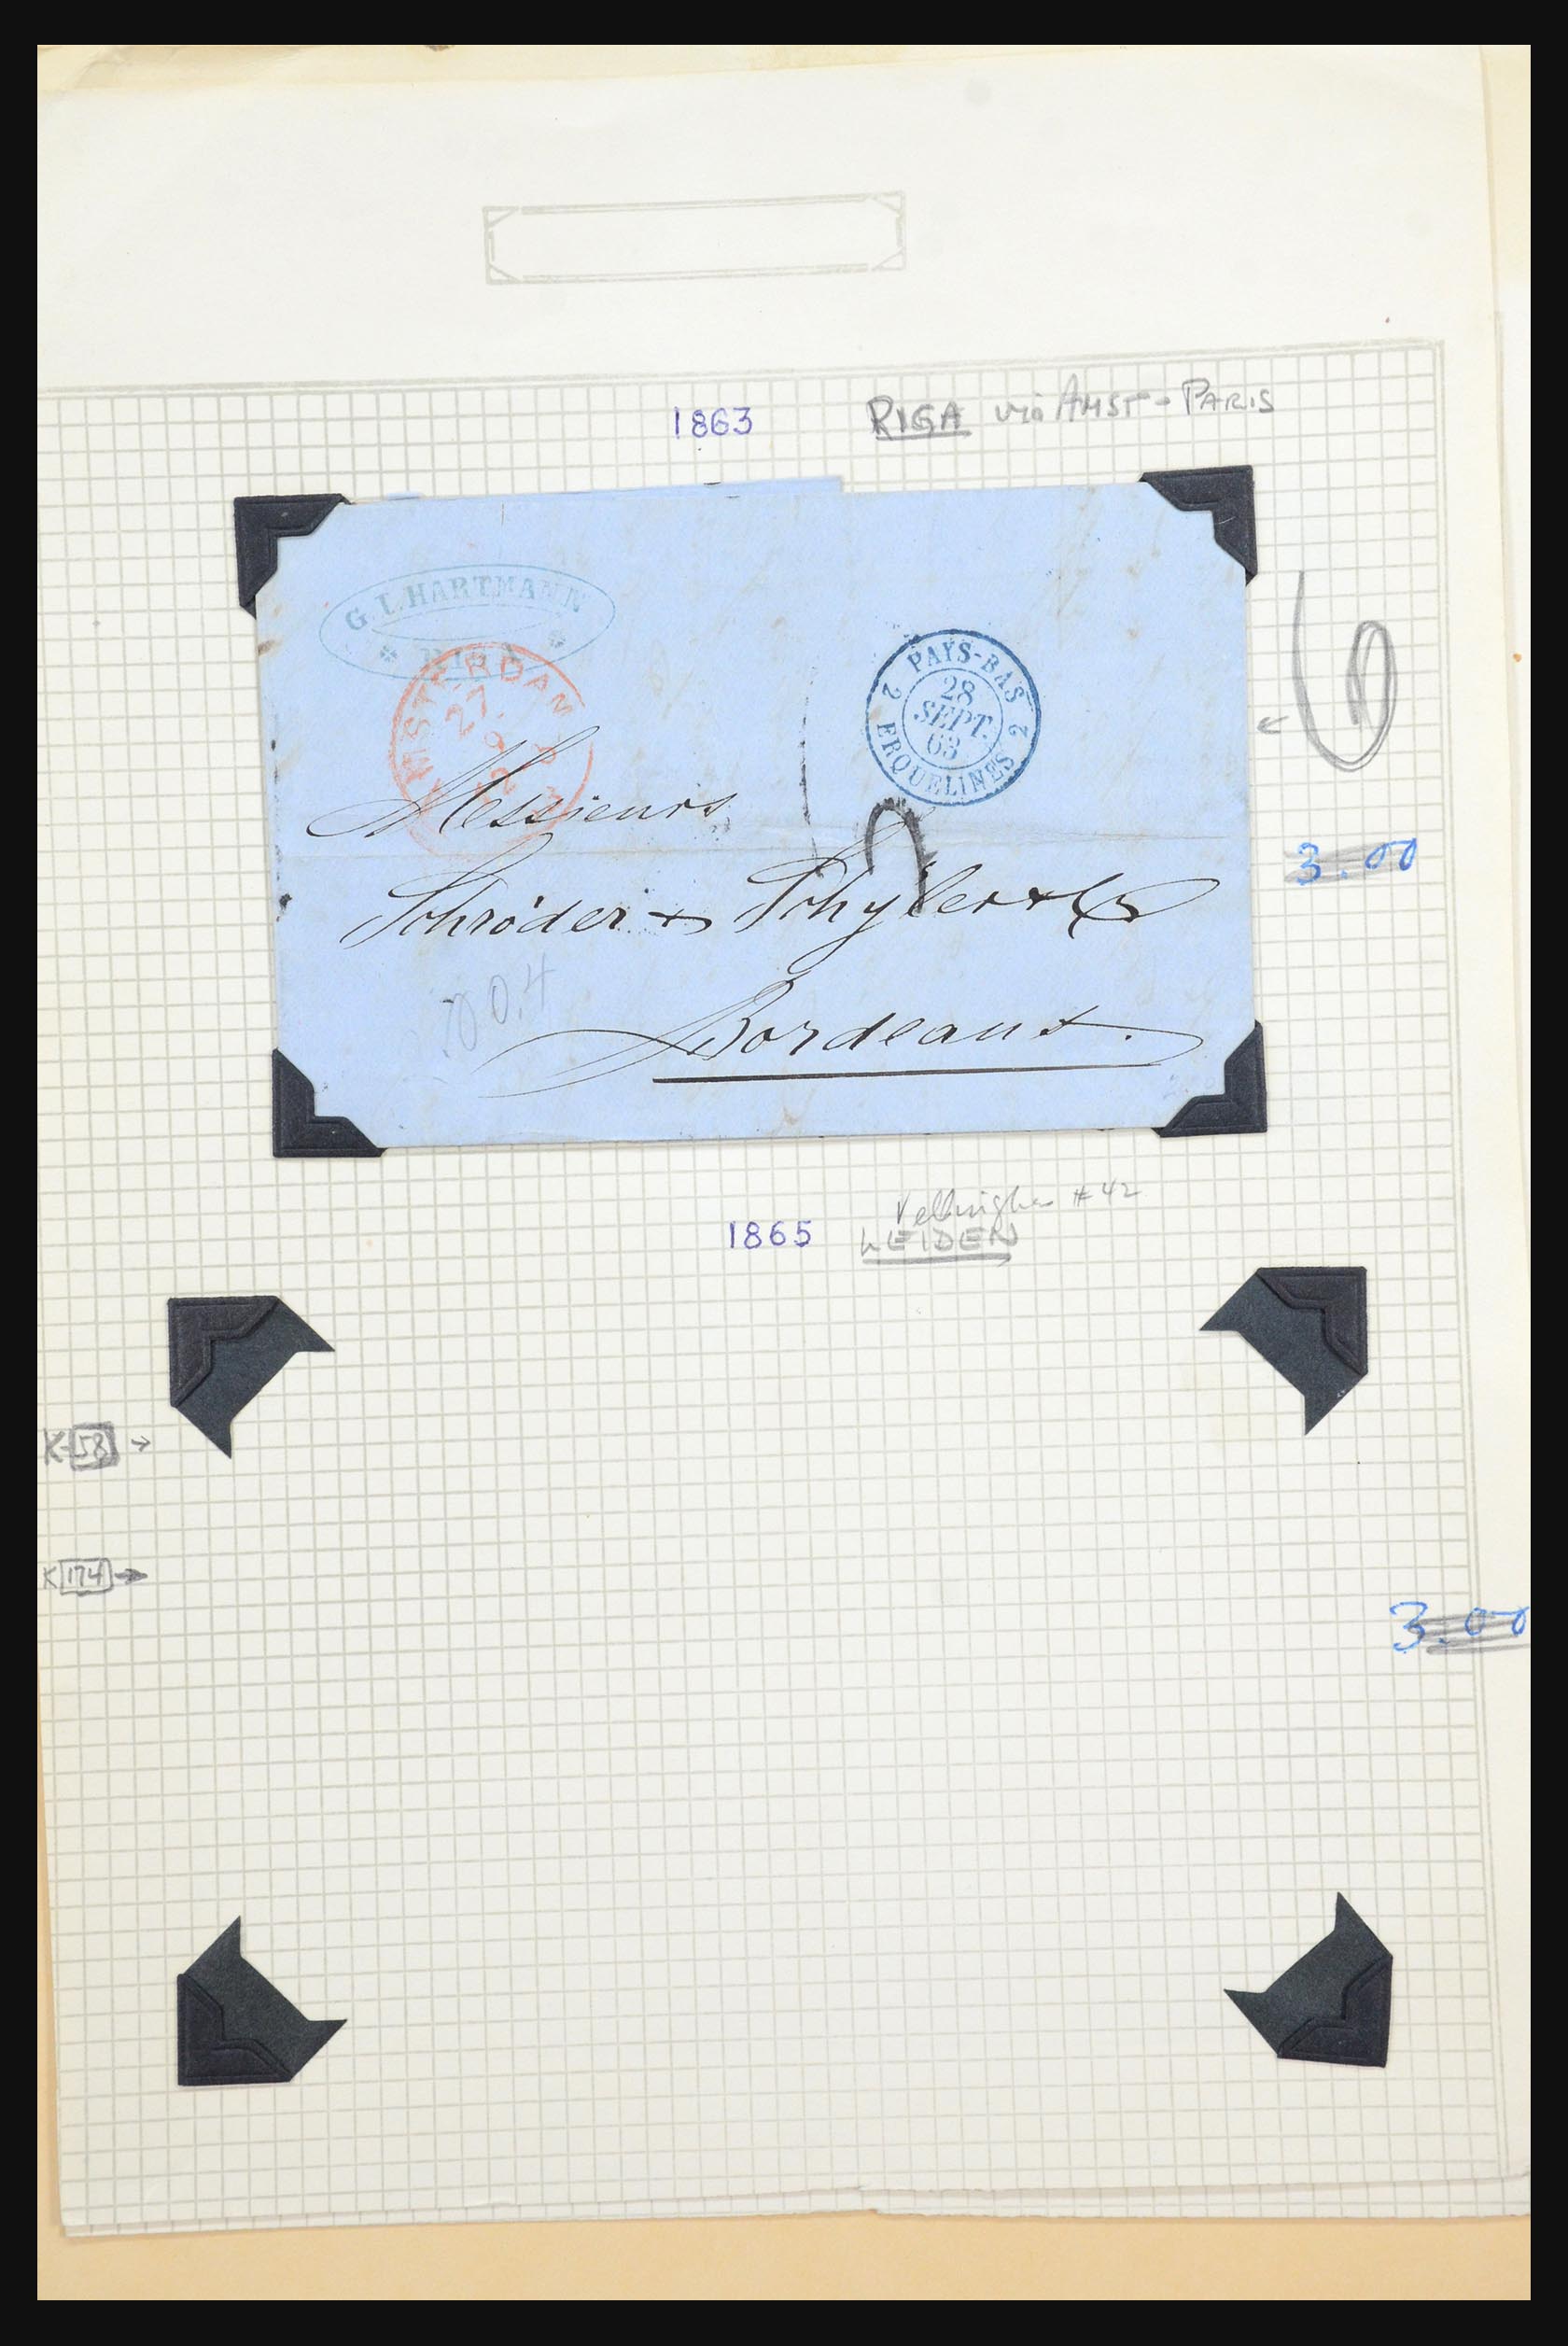 31567 036 - 31567 Netherlands covers 1687-1869.